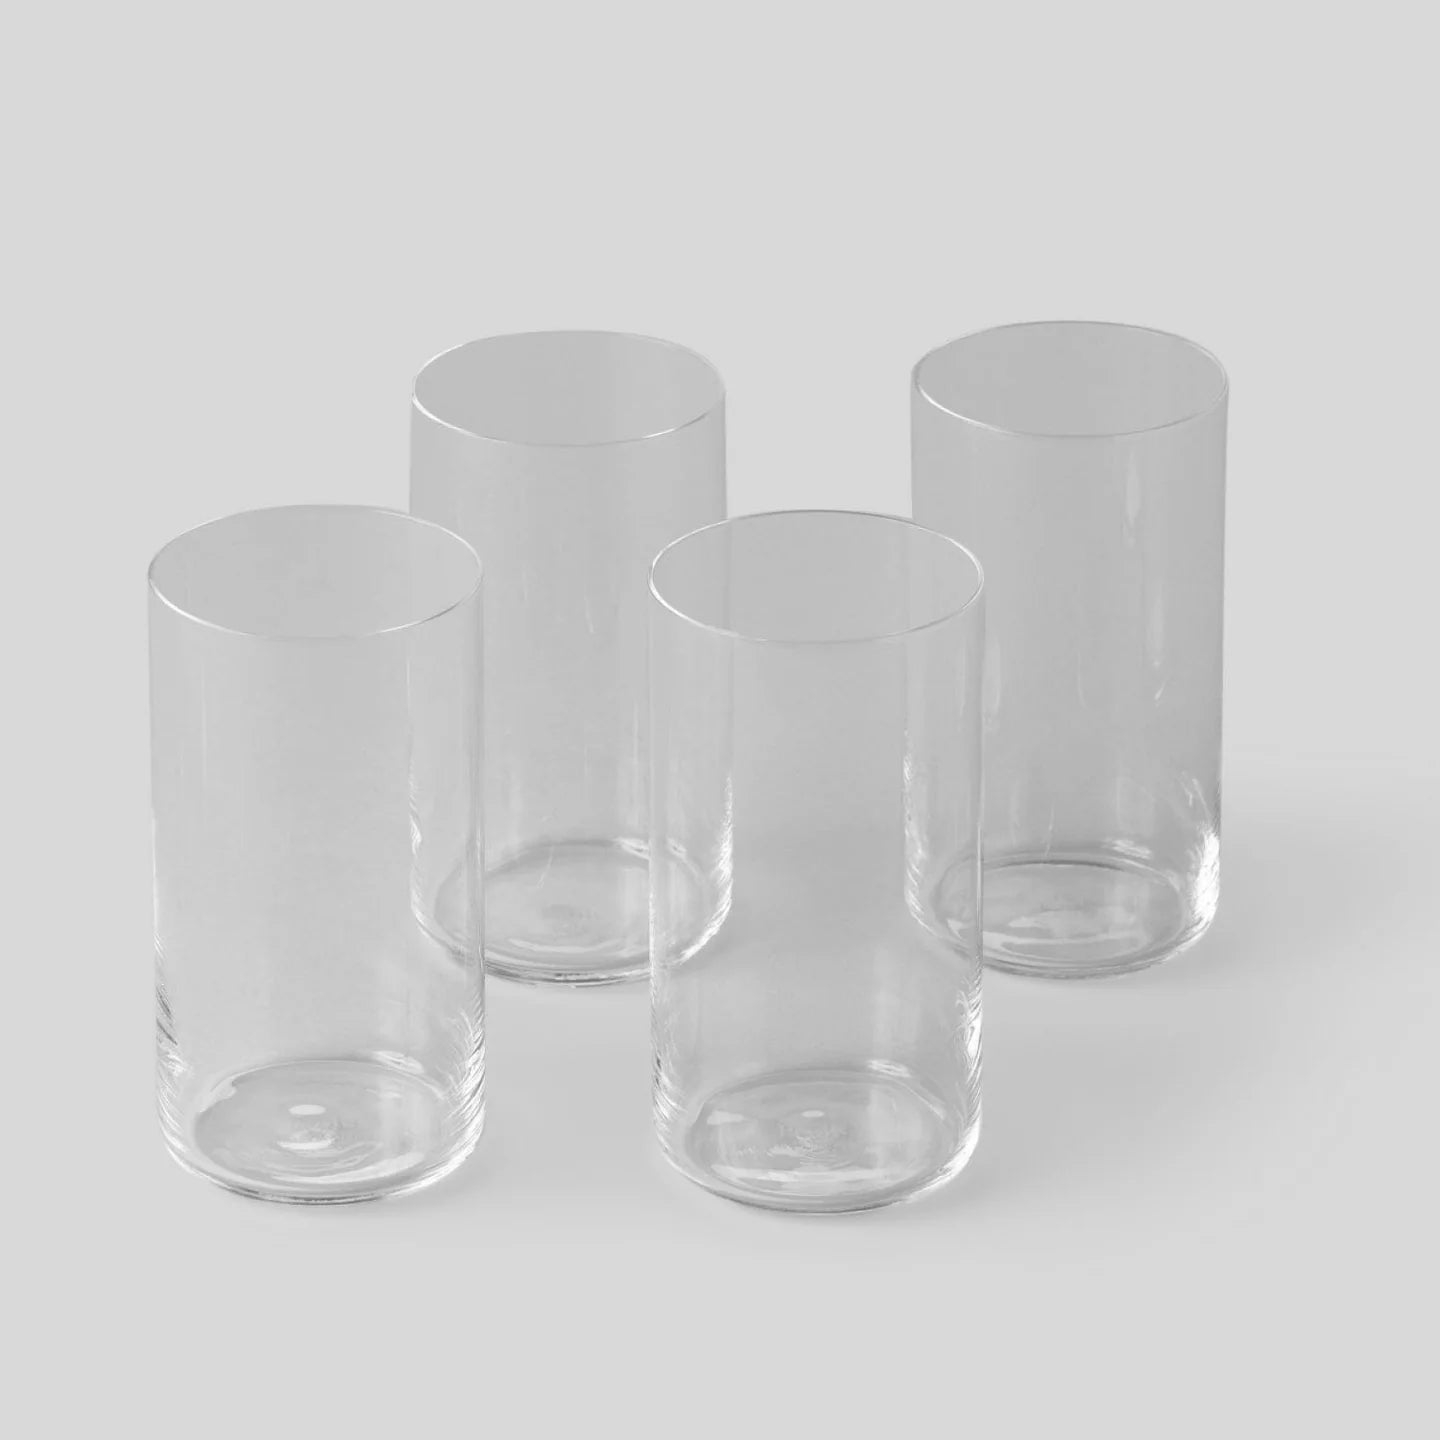 The Tall Glasses - Set of 4